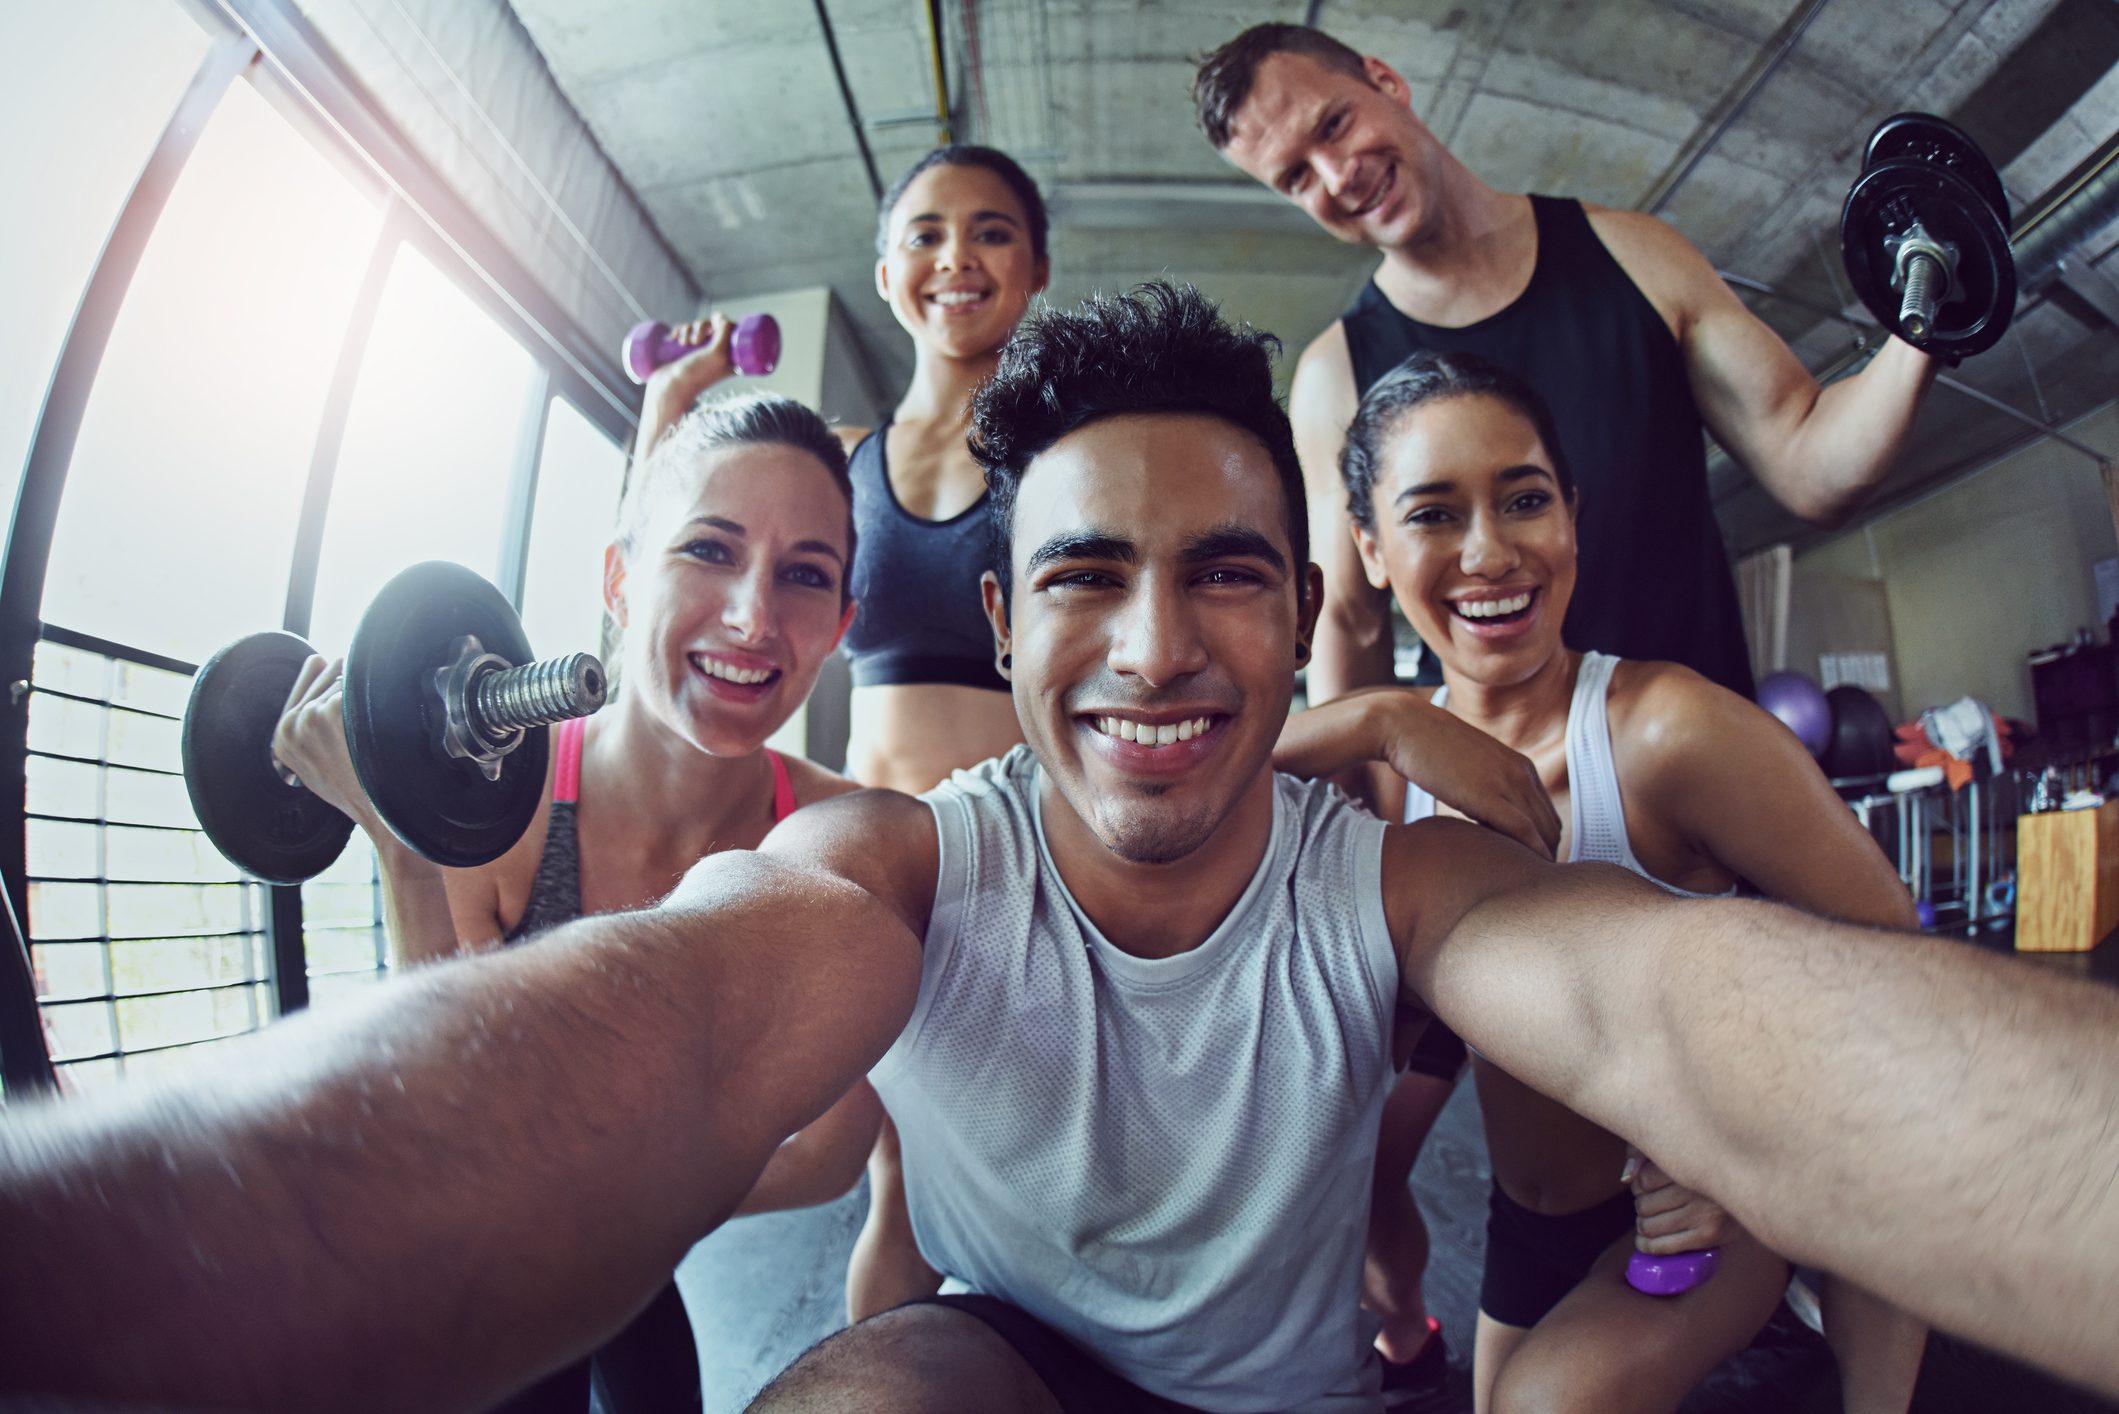 Personal trainer with clients taking a selfie